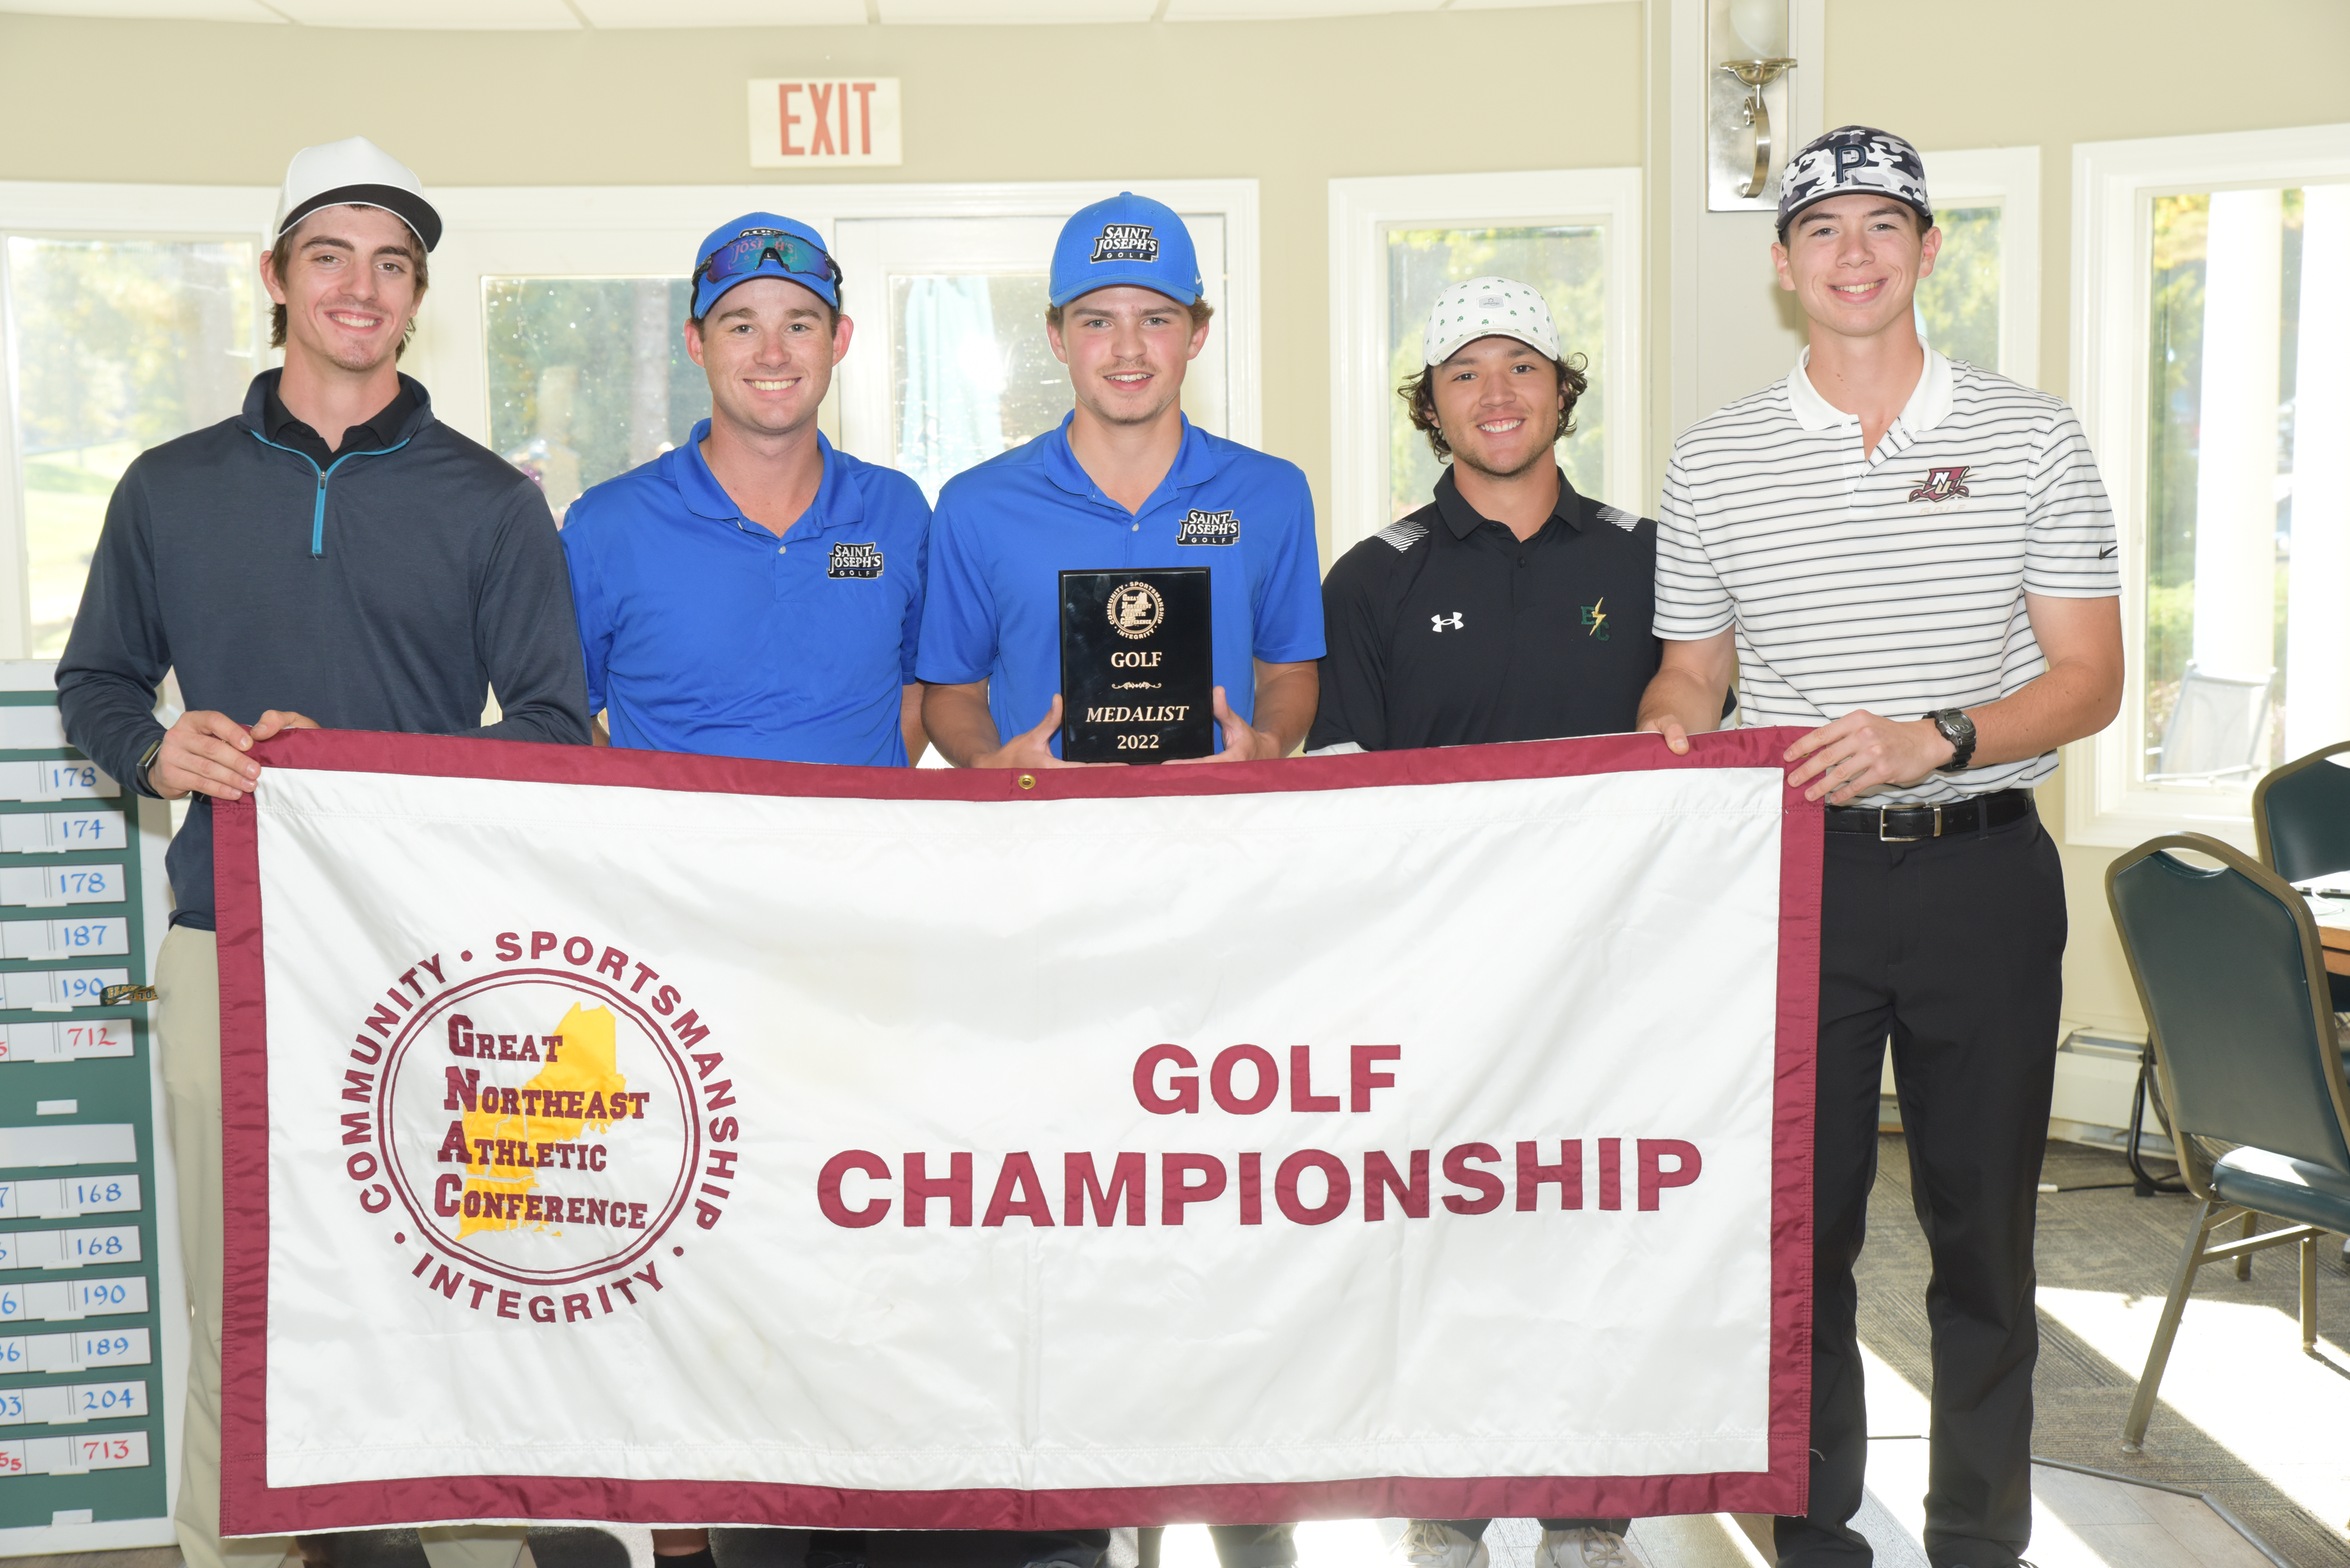 Keefe and Pearce Finish Top 5 in GNAC Golf Championship